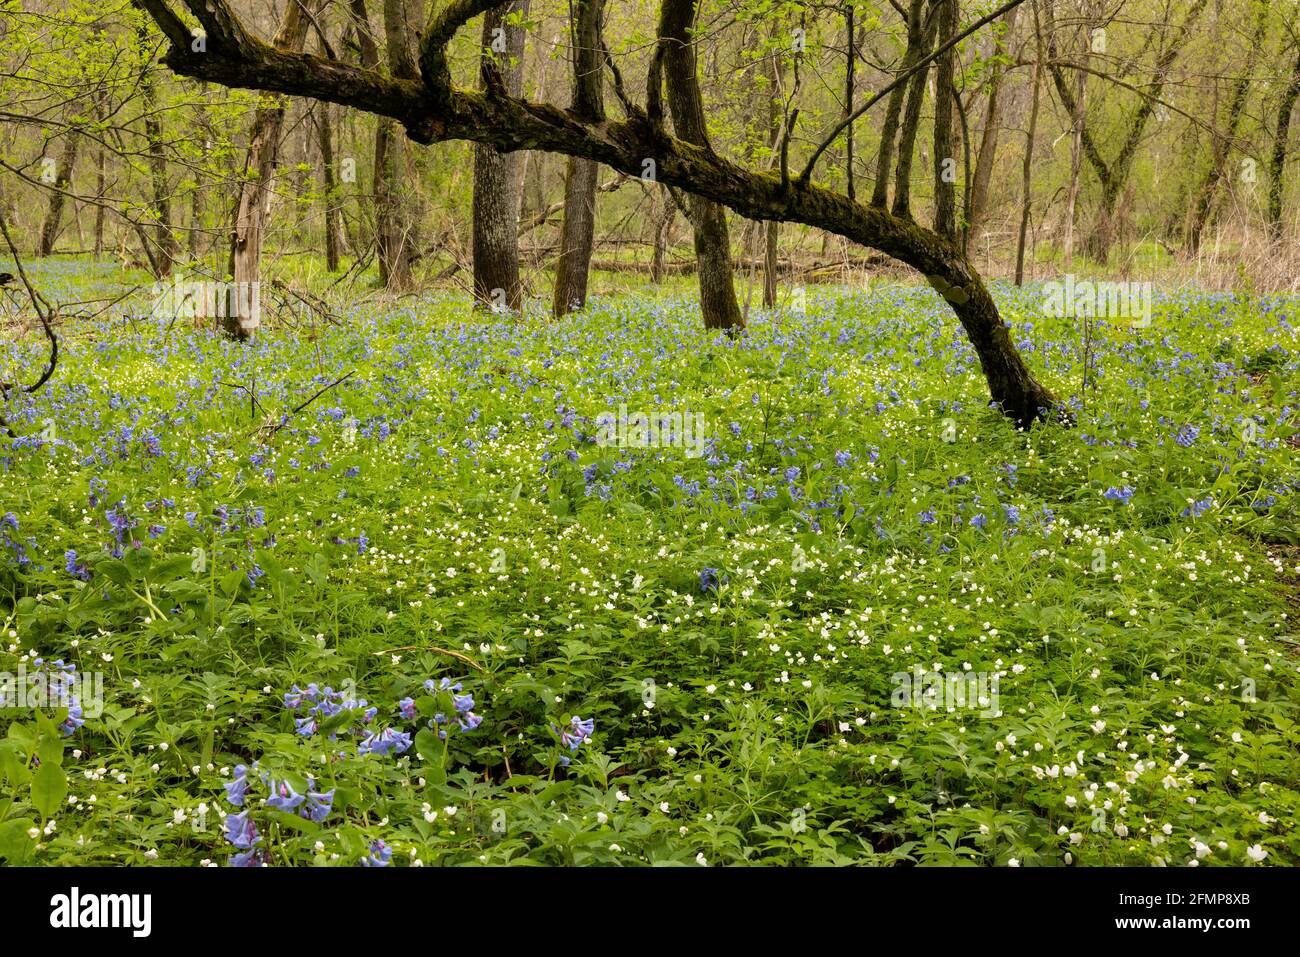 Blue Bells and Wood Anemone Wildflowers In The Woods Stock Photo